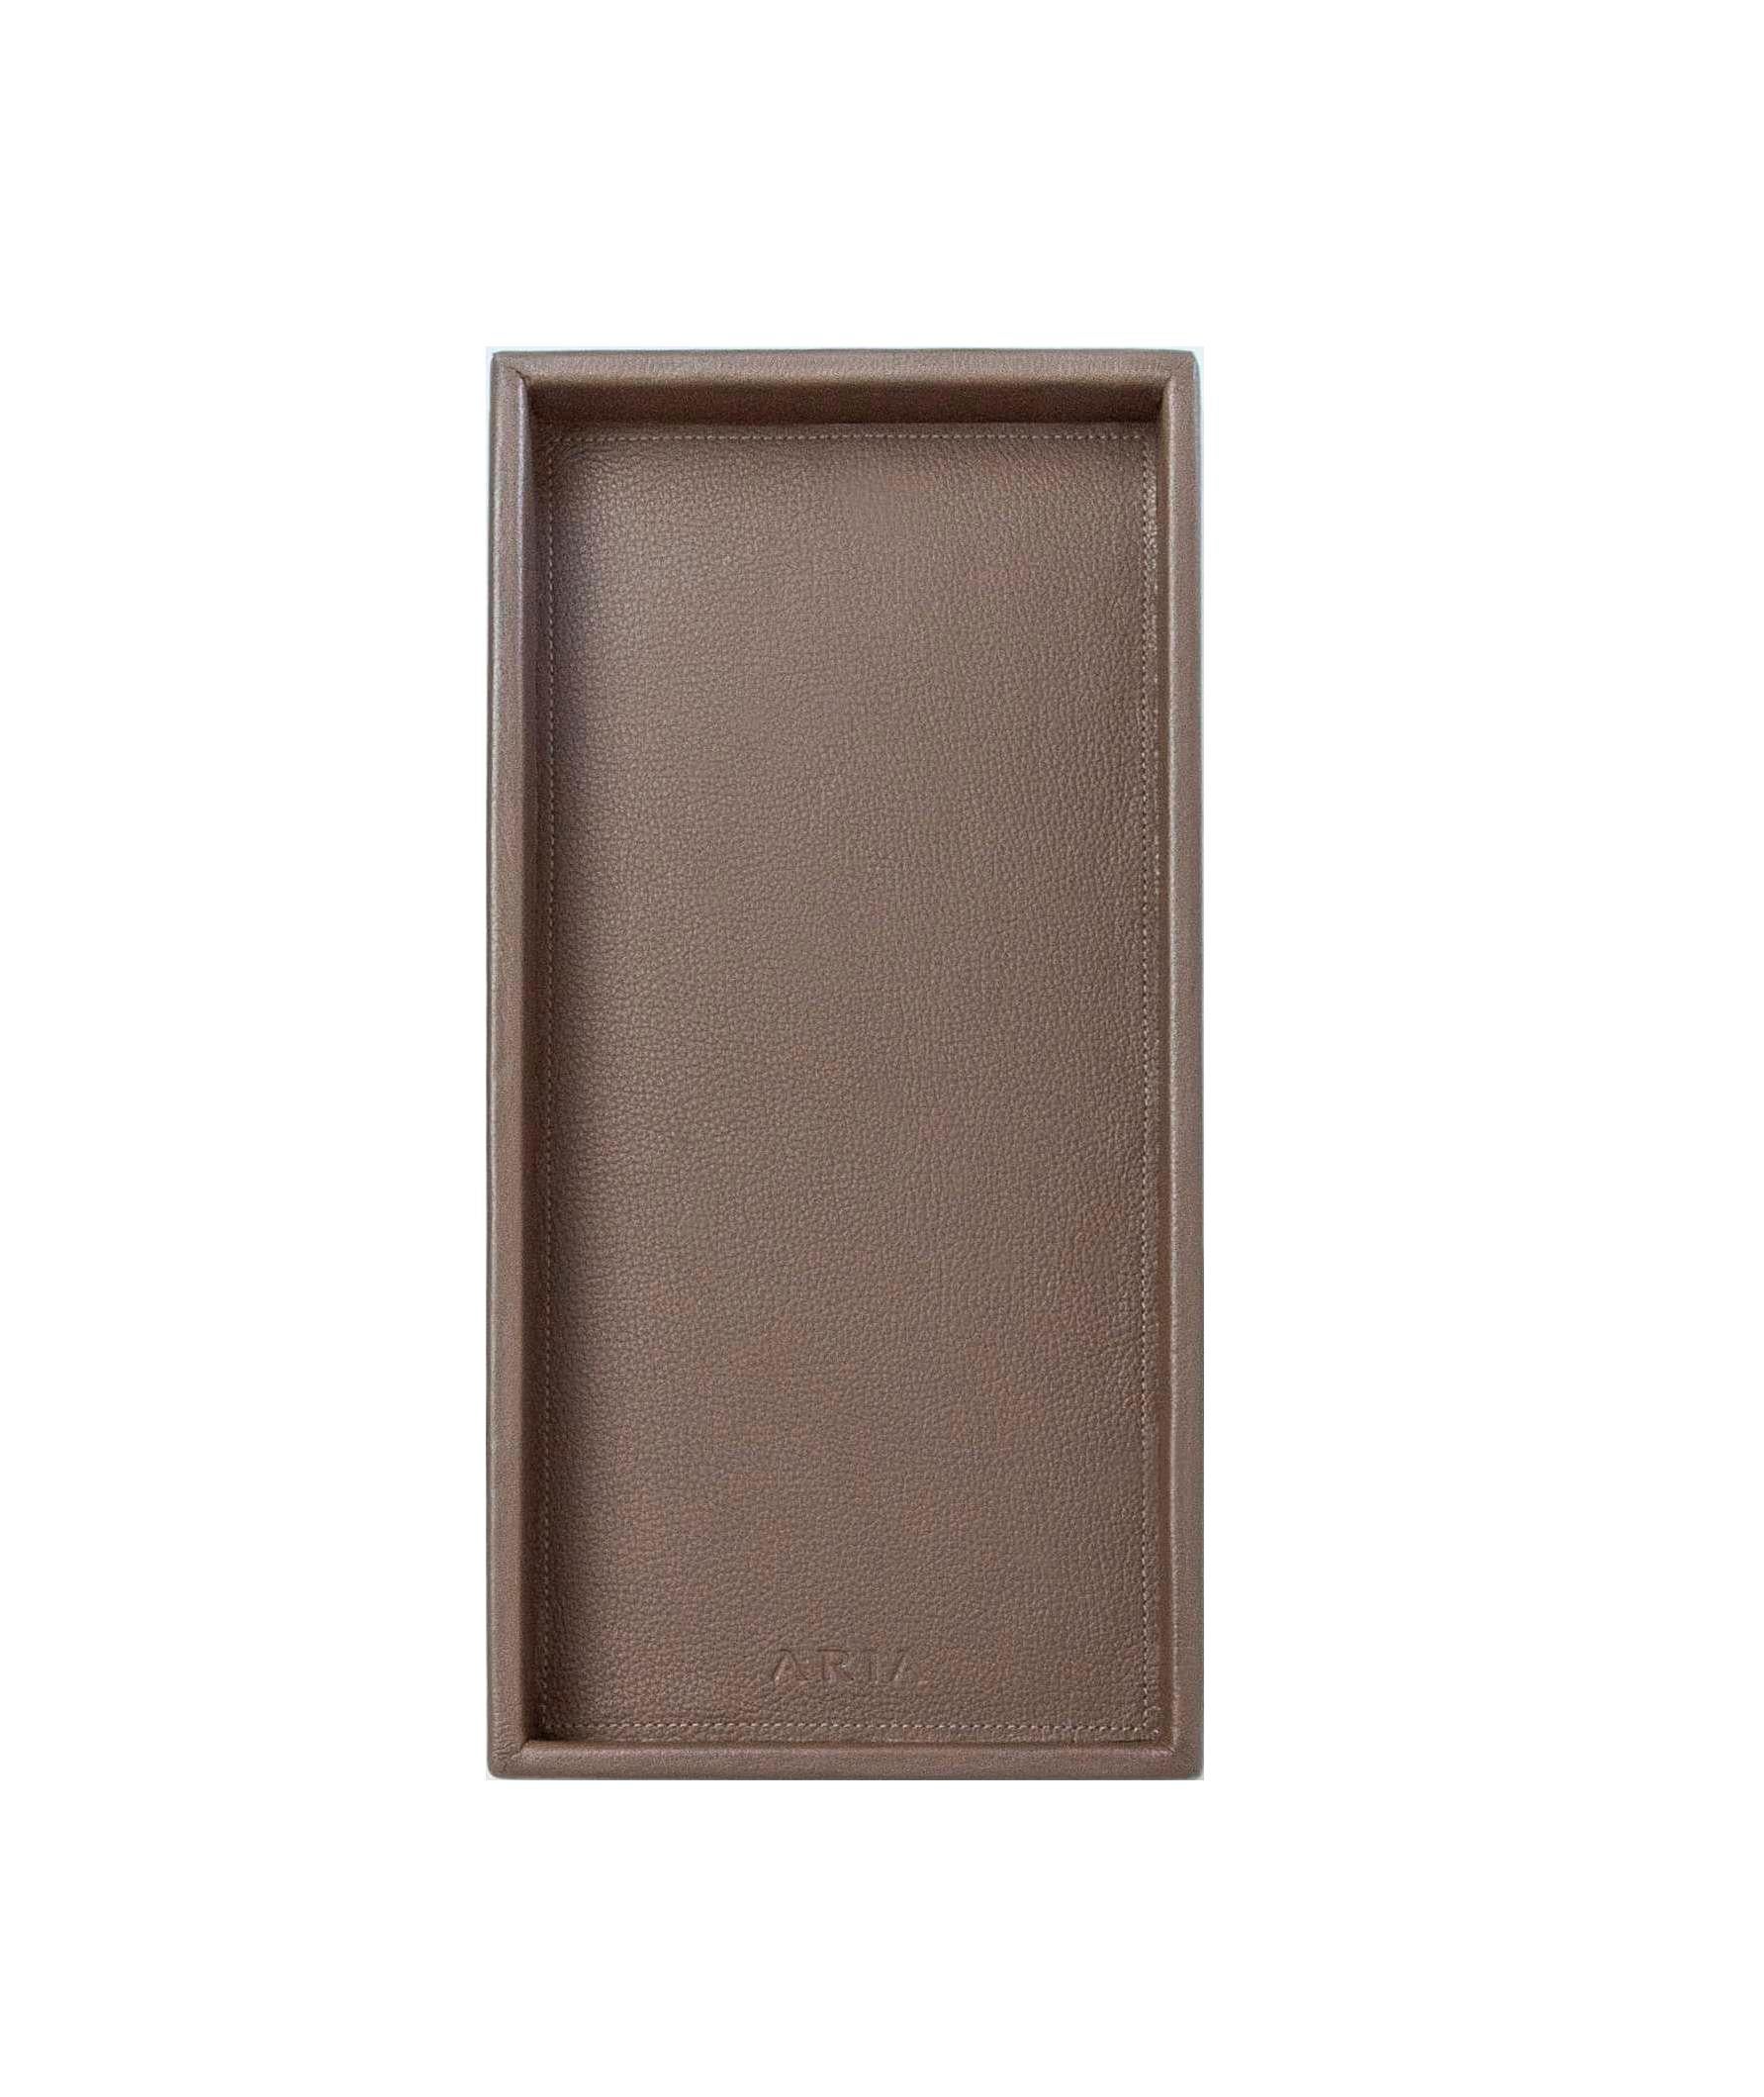 Modern Leather Tray, Medium A Rectangular Tray - Handmade in Brazil - Color: Clay For Sale